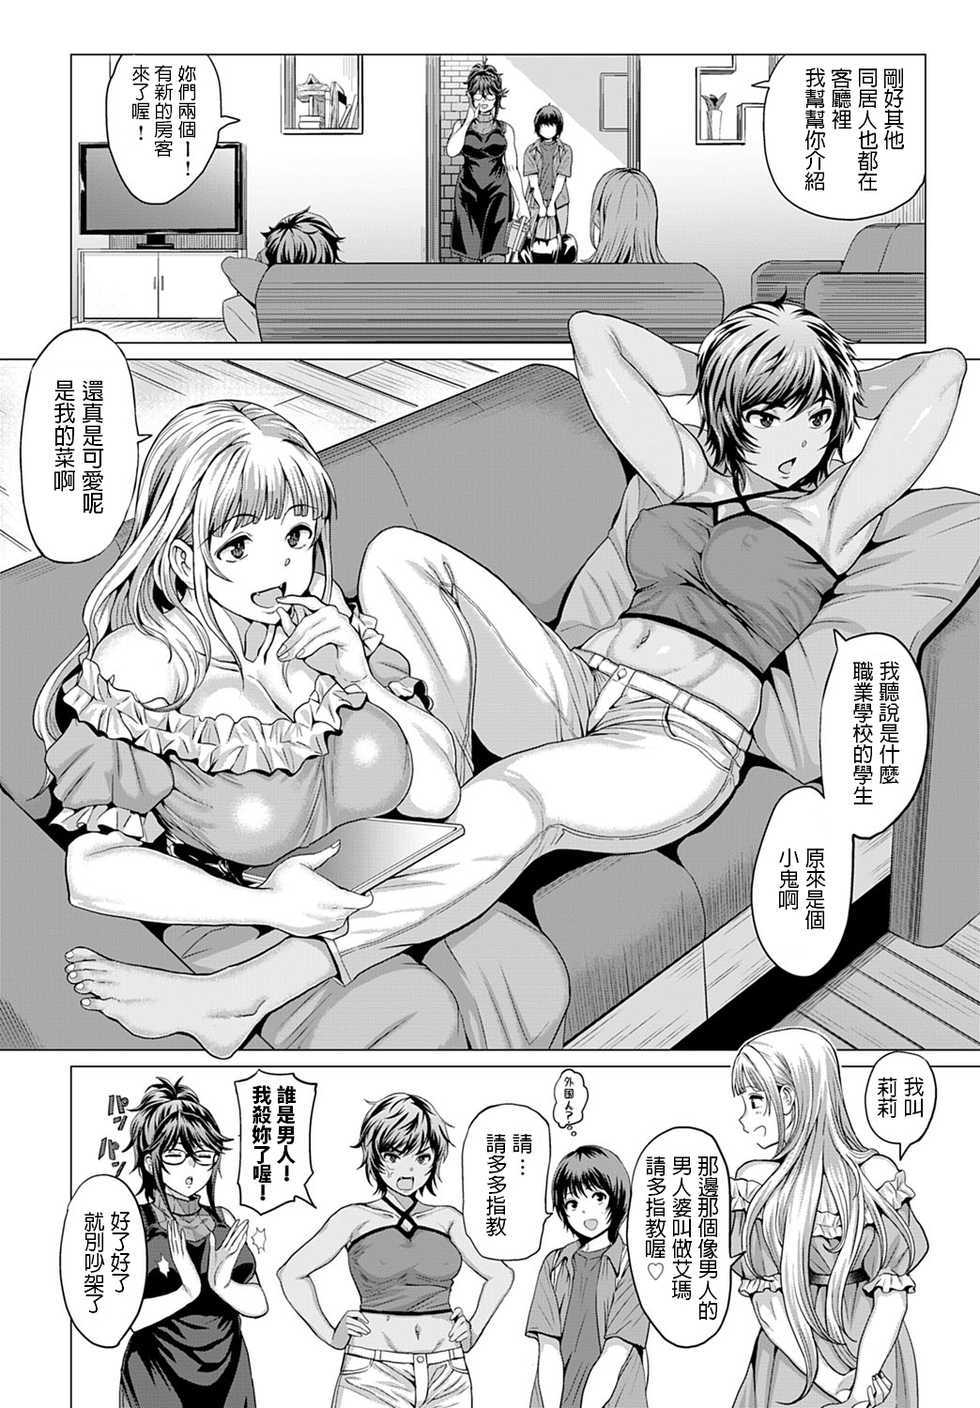 [Chicken] Succubus Share House e Youkoso! (COMIC Anthurium 2020-01) [Chinese] [Digital] - Page 2